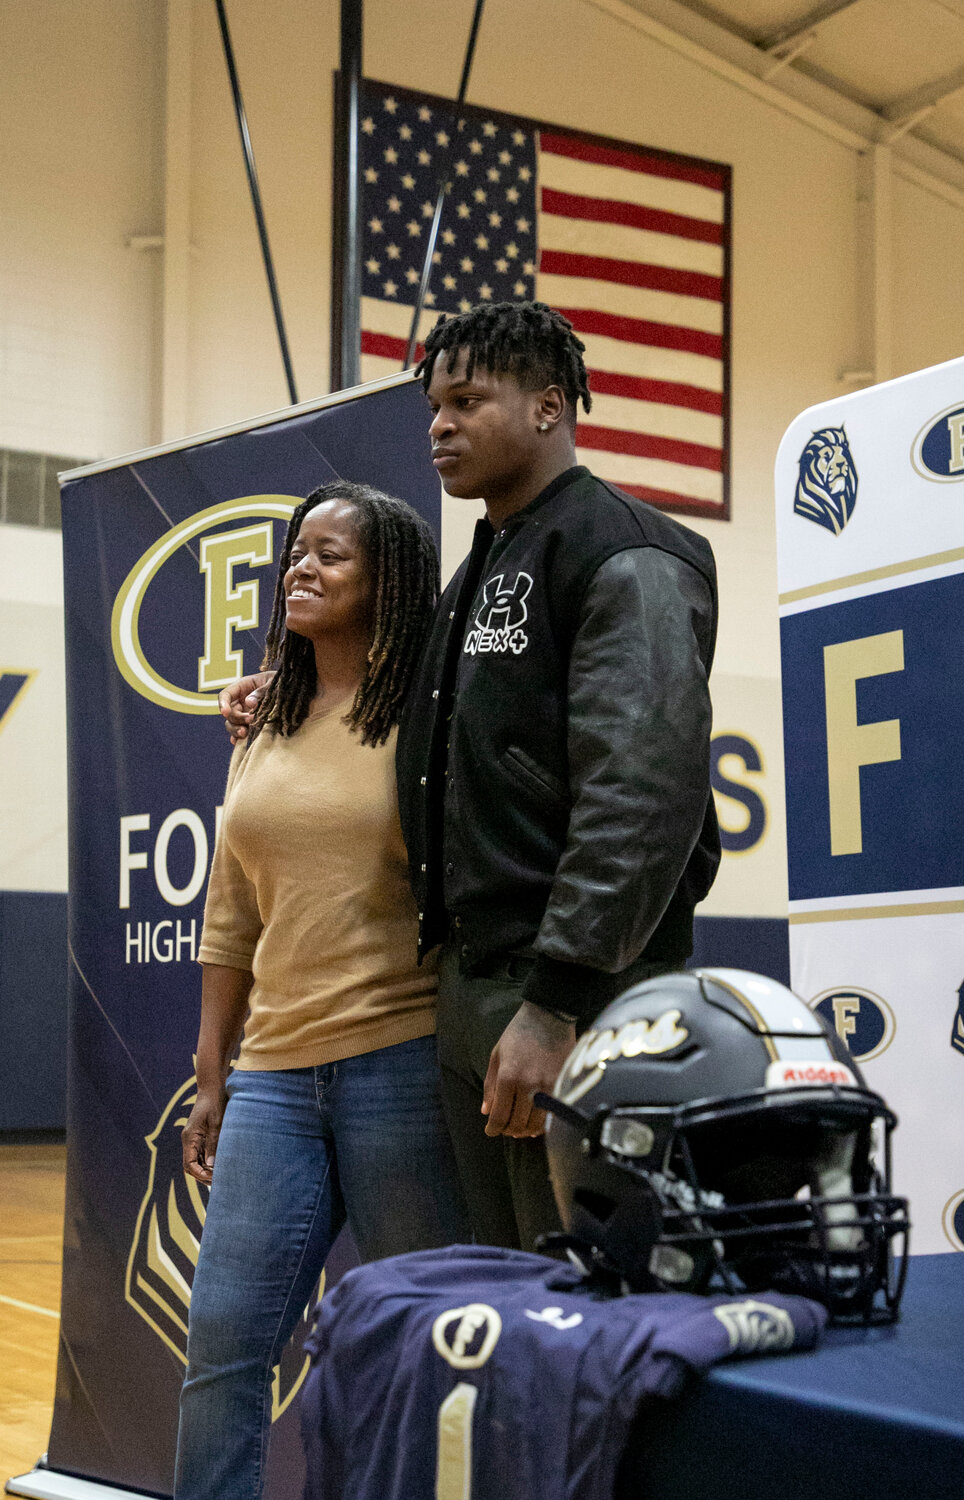 A Friday ceremony was hosted at Foley High School where Perry Thompson was recognized with his Under Armour All-American jersey following a standout senior season as an Auburn commit. Thompson said he was proud of the accomplishments he achieved in Foley.